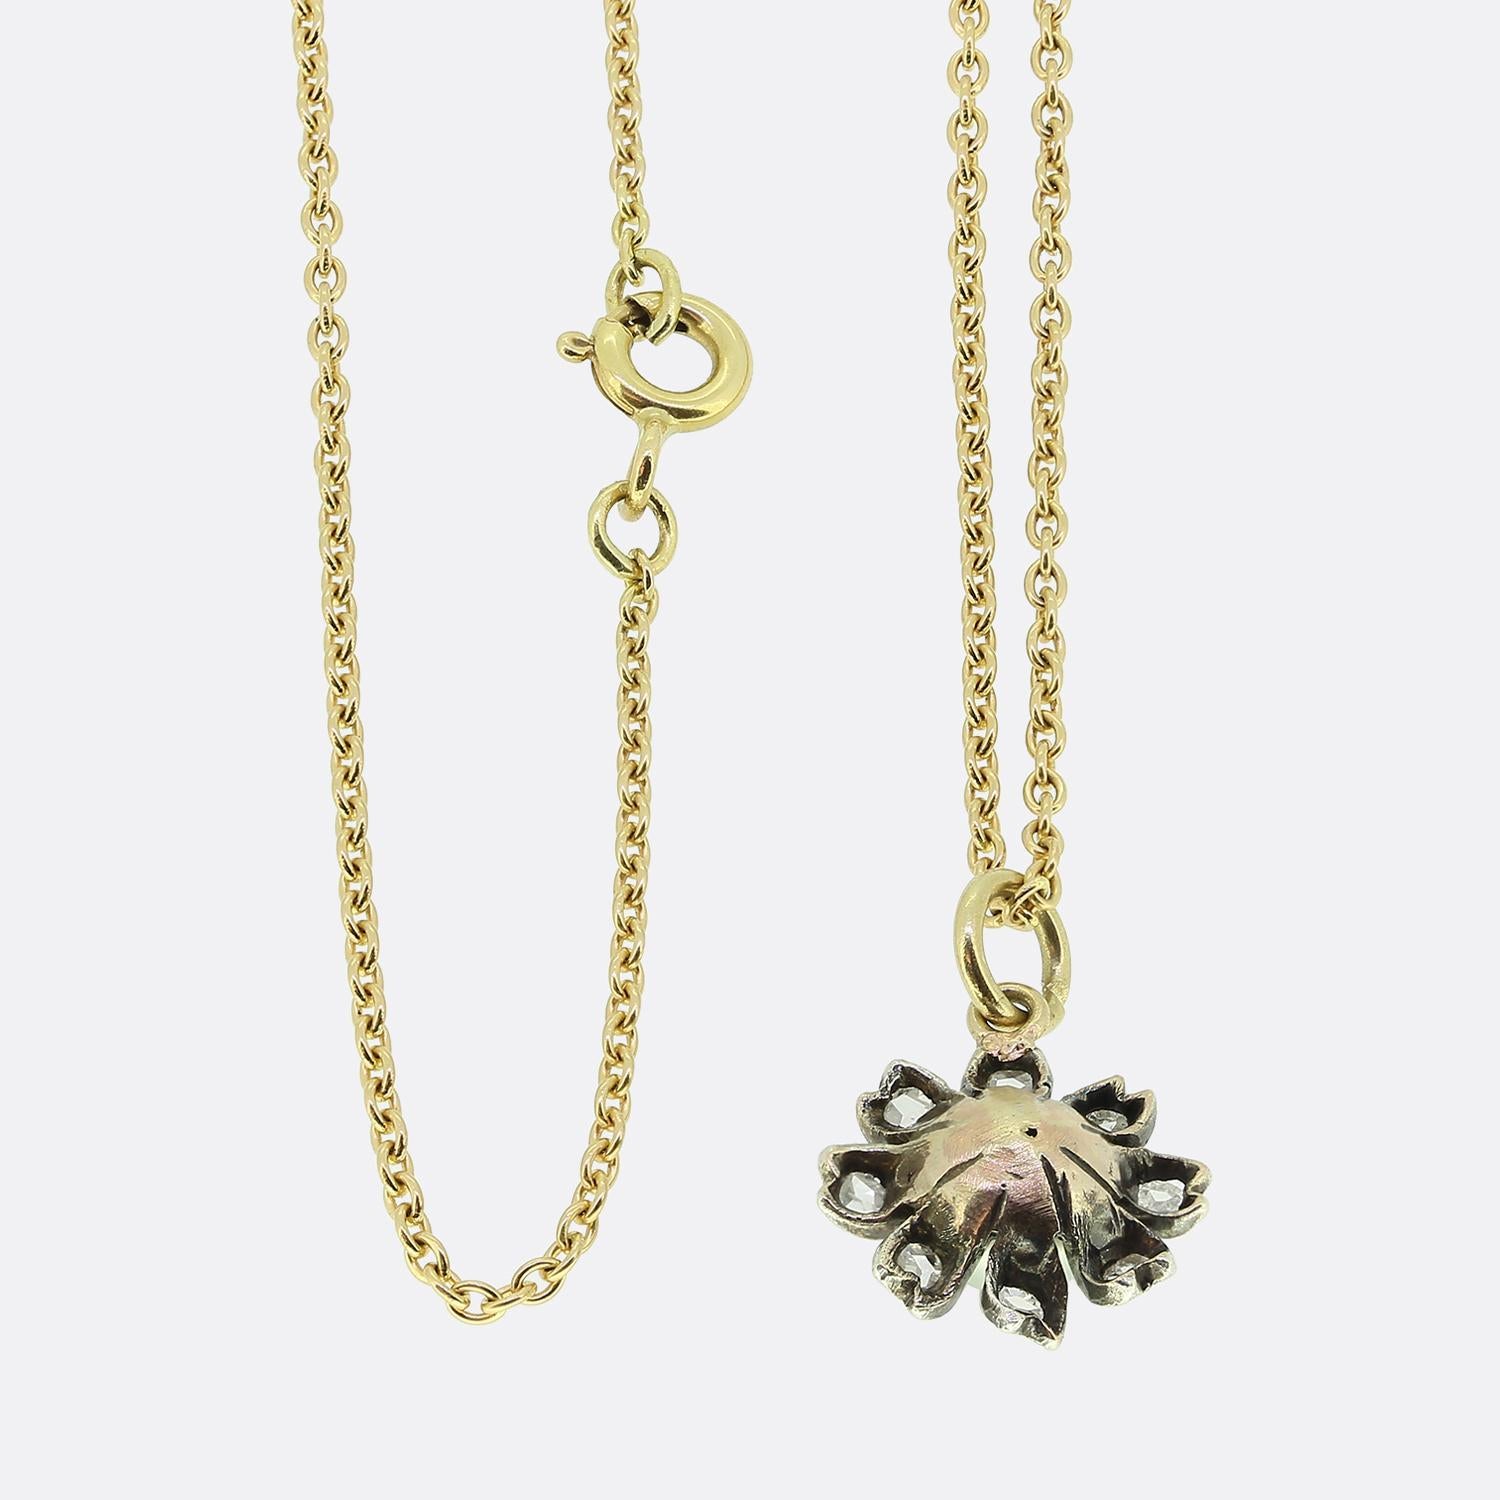 Here we have a delightful pearl and diamond set pendant necklace. This antique pendant has been crafted from yellow gold into the shape of a flower head and silver set with a single round shaped natural pearl at the centre. This principal stone